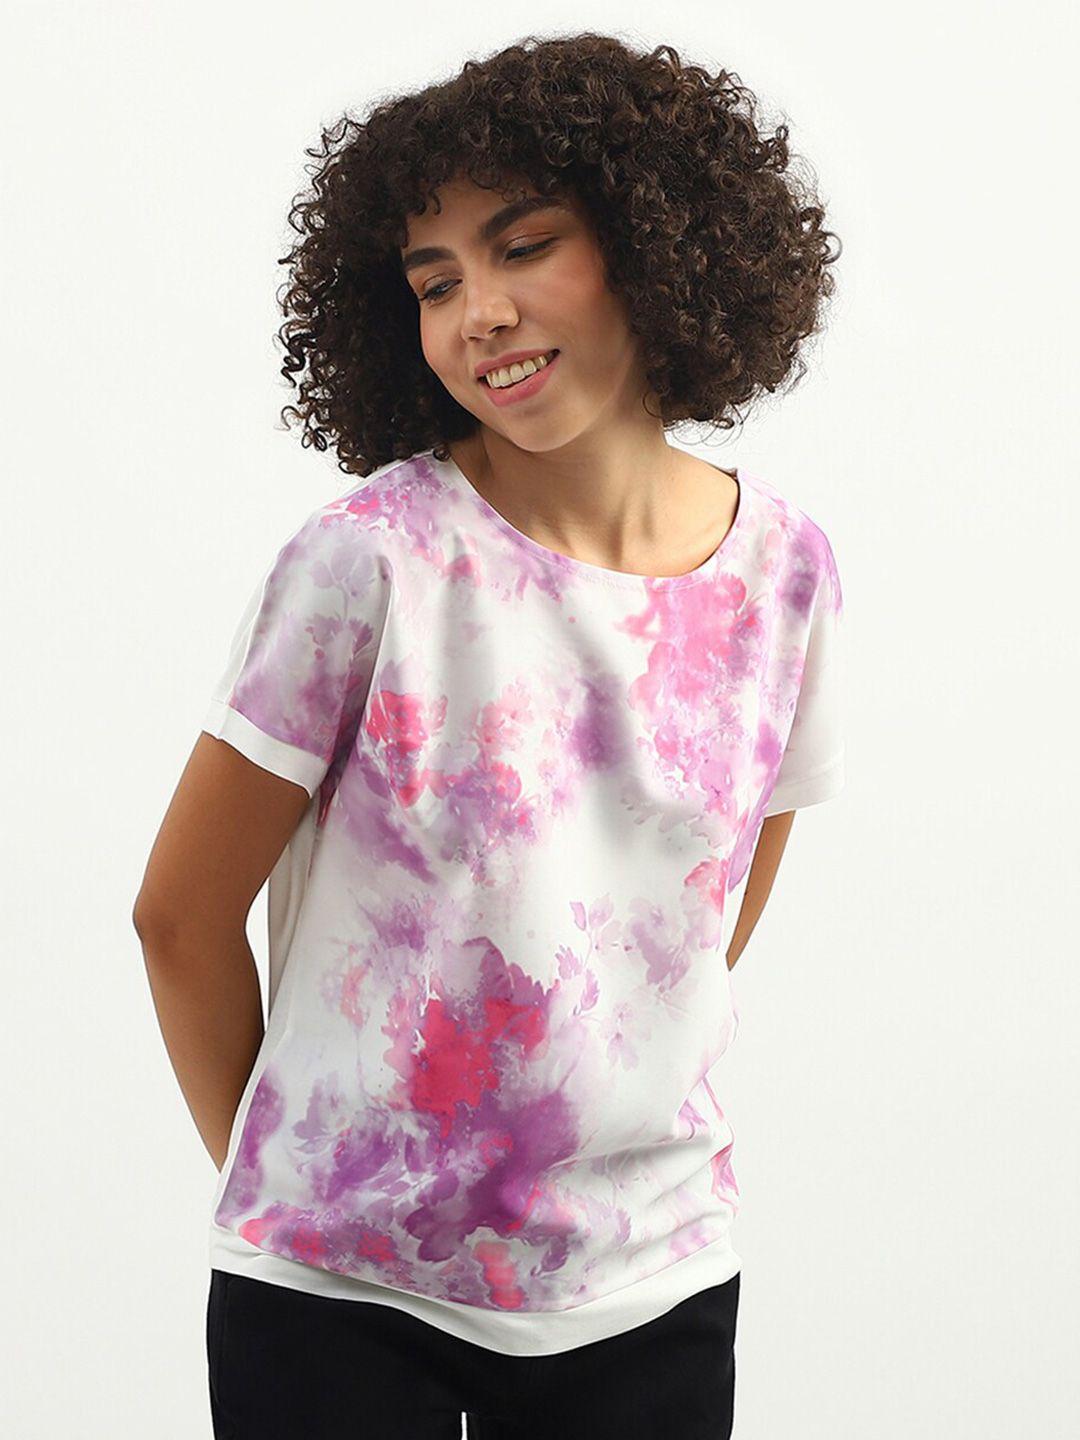 united-colors-of-benetton-tie-and-dye-top